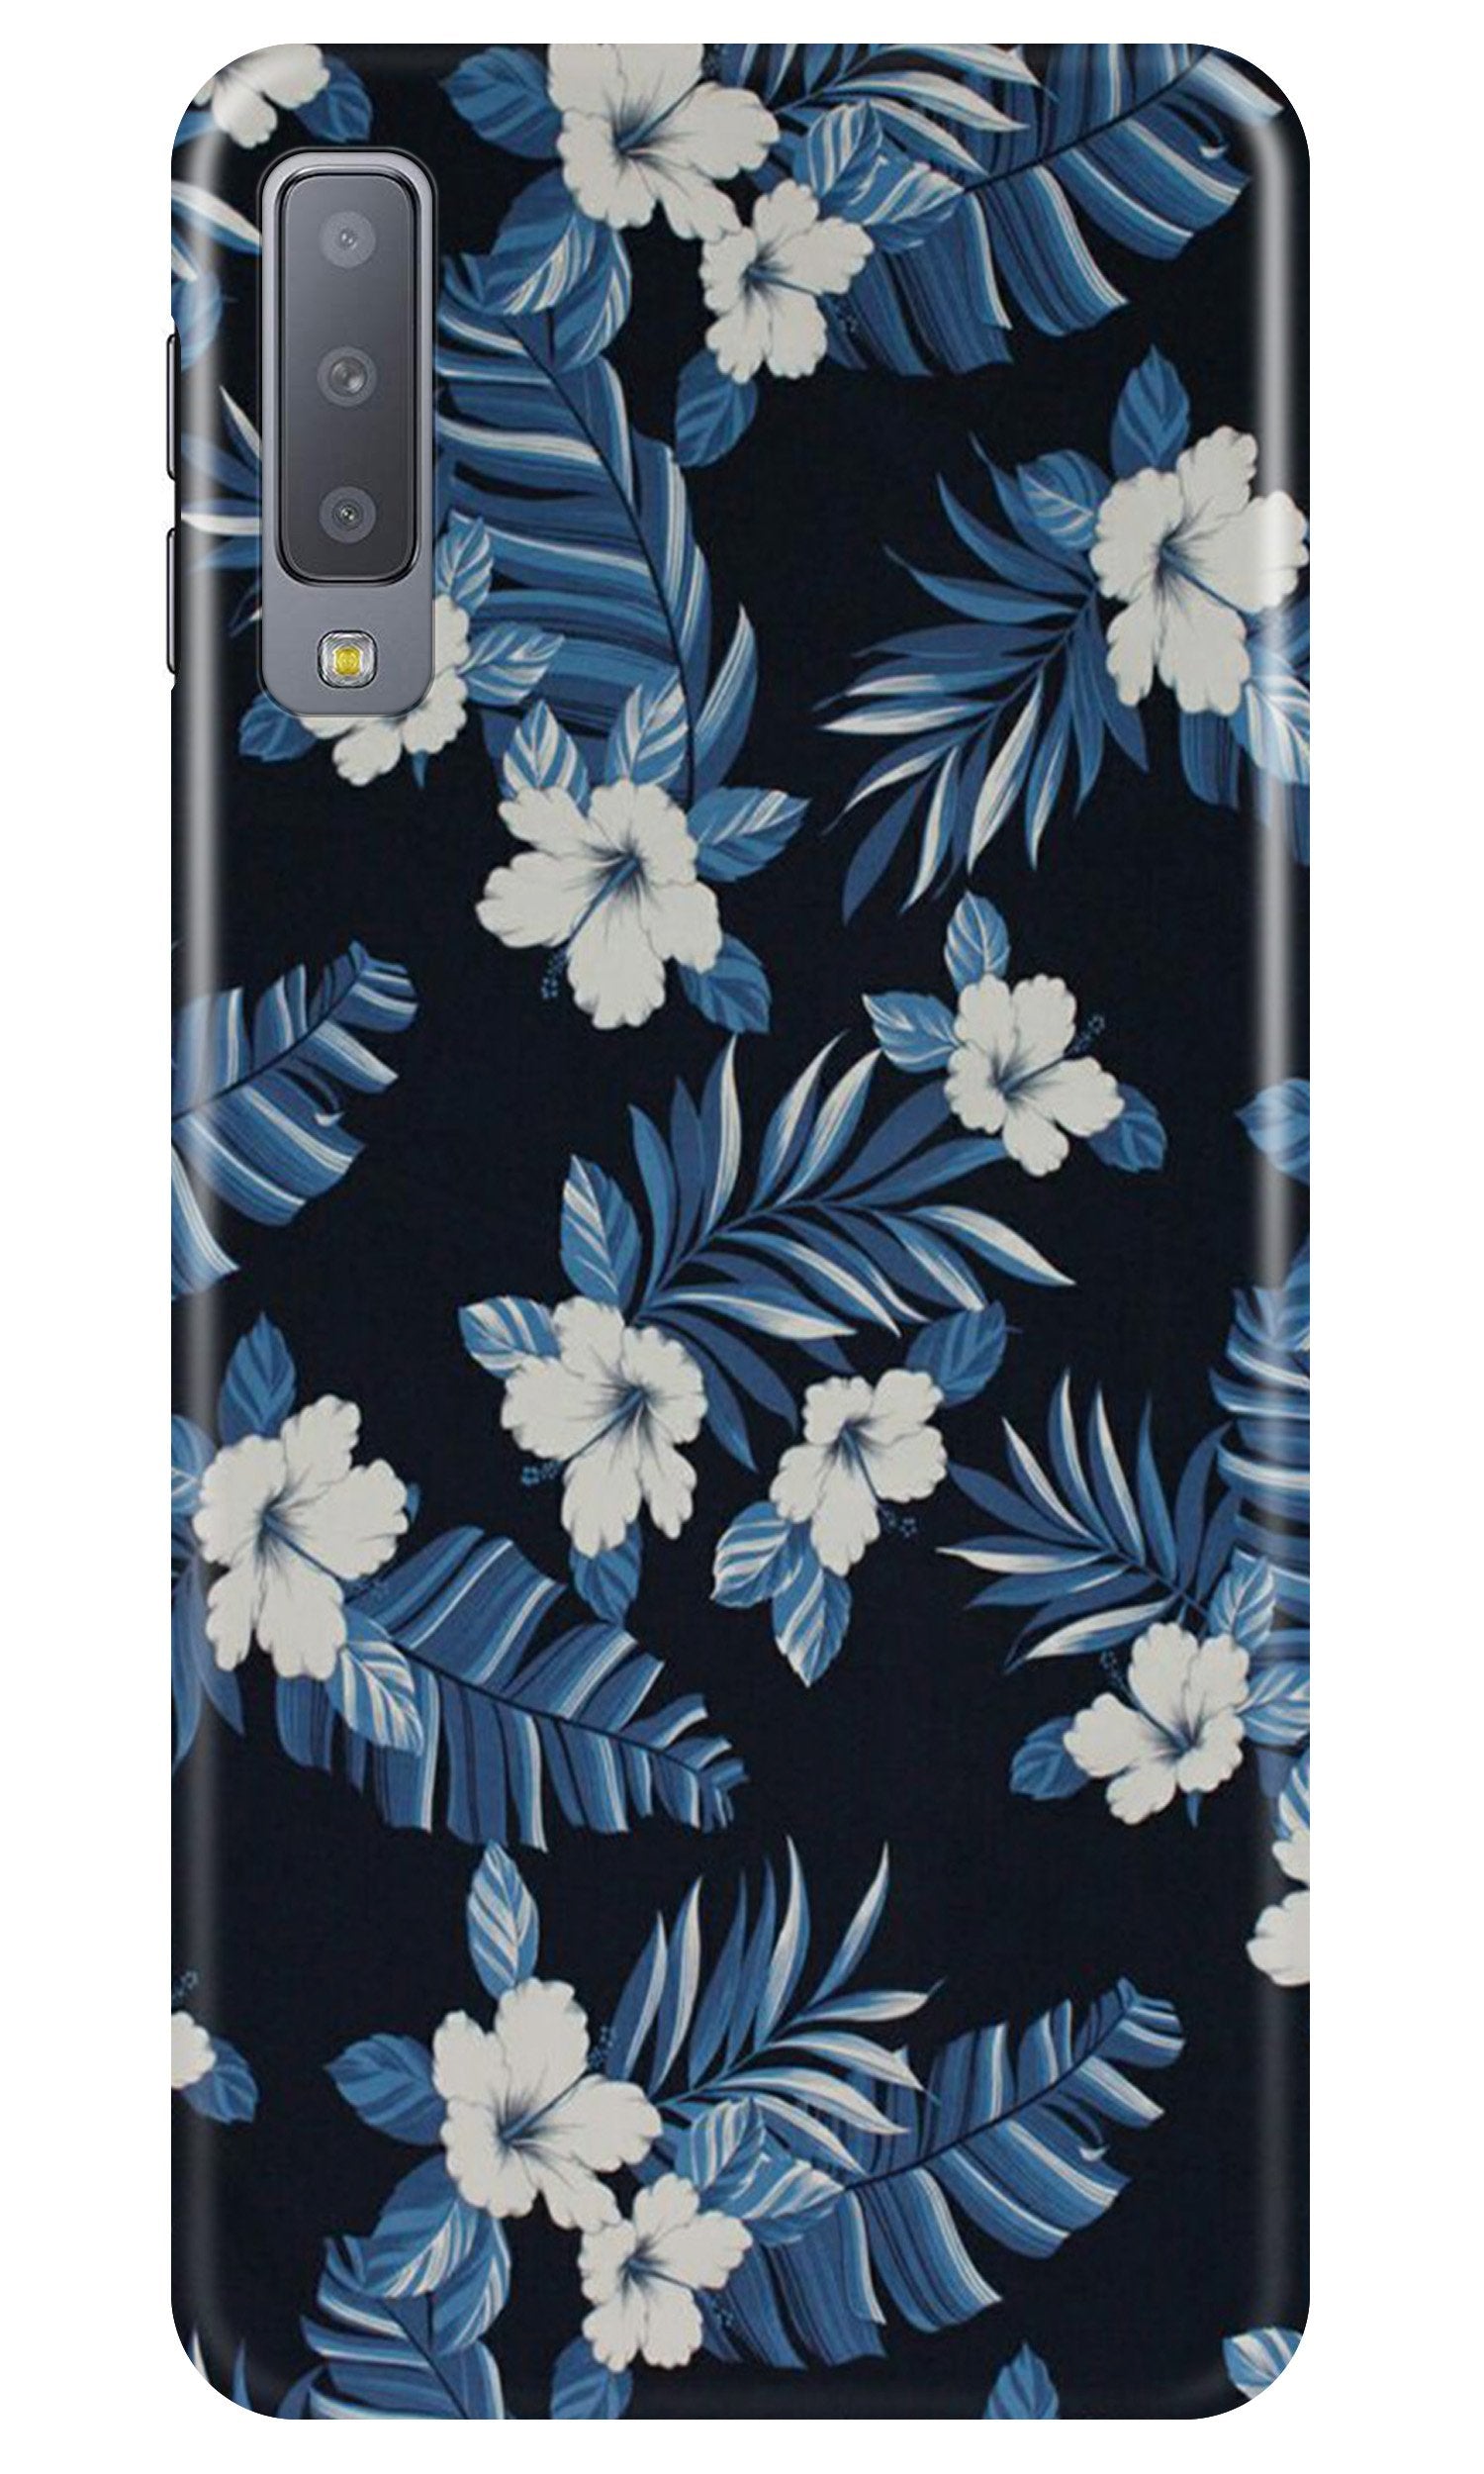 White flowers Blue Background2 Case for Samung Galaxy A70s